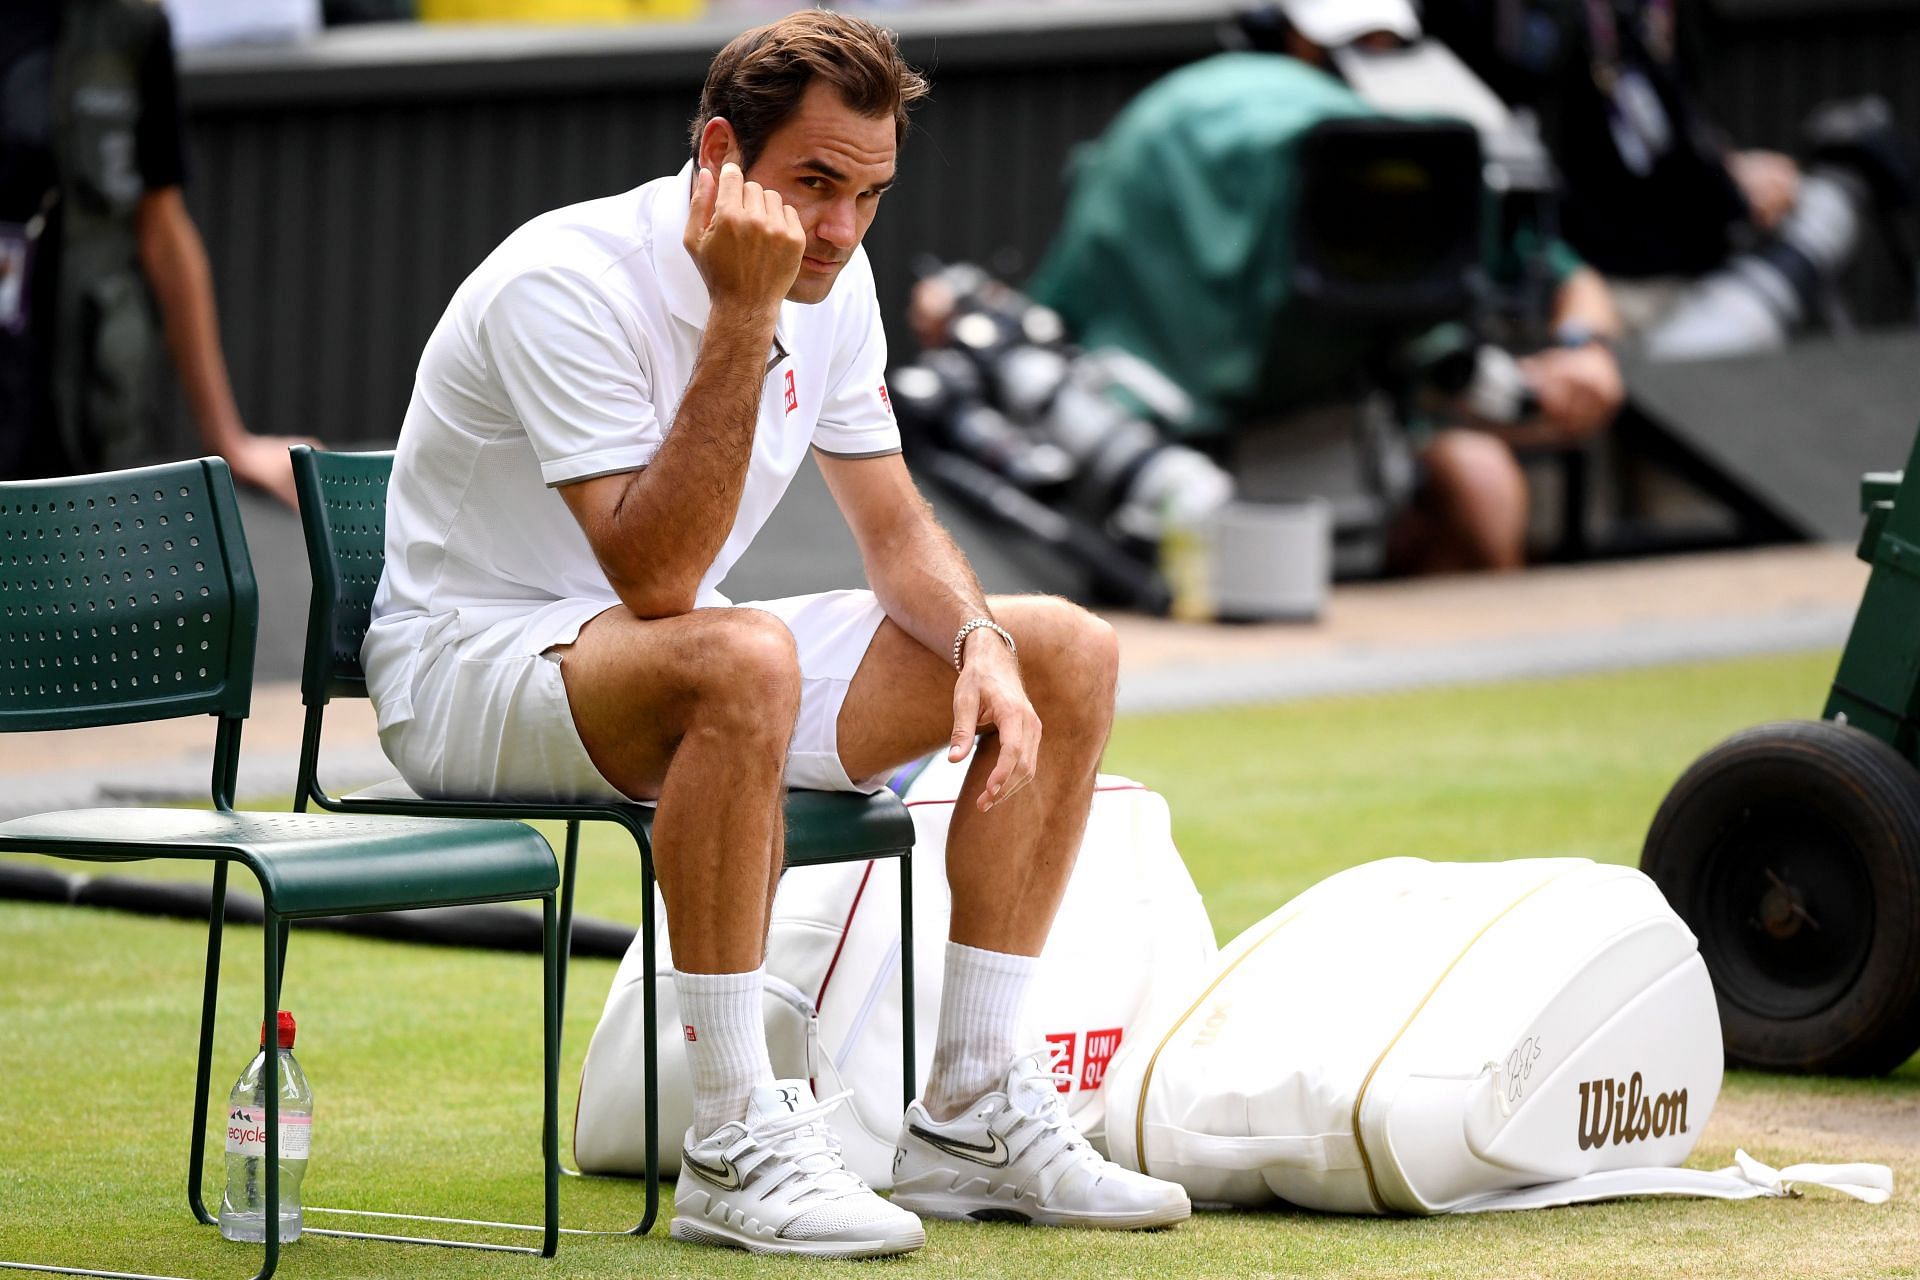 Roger Federer last played a match at the 2021 Wimbledon Championships